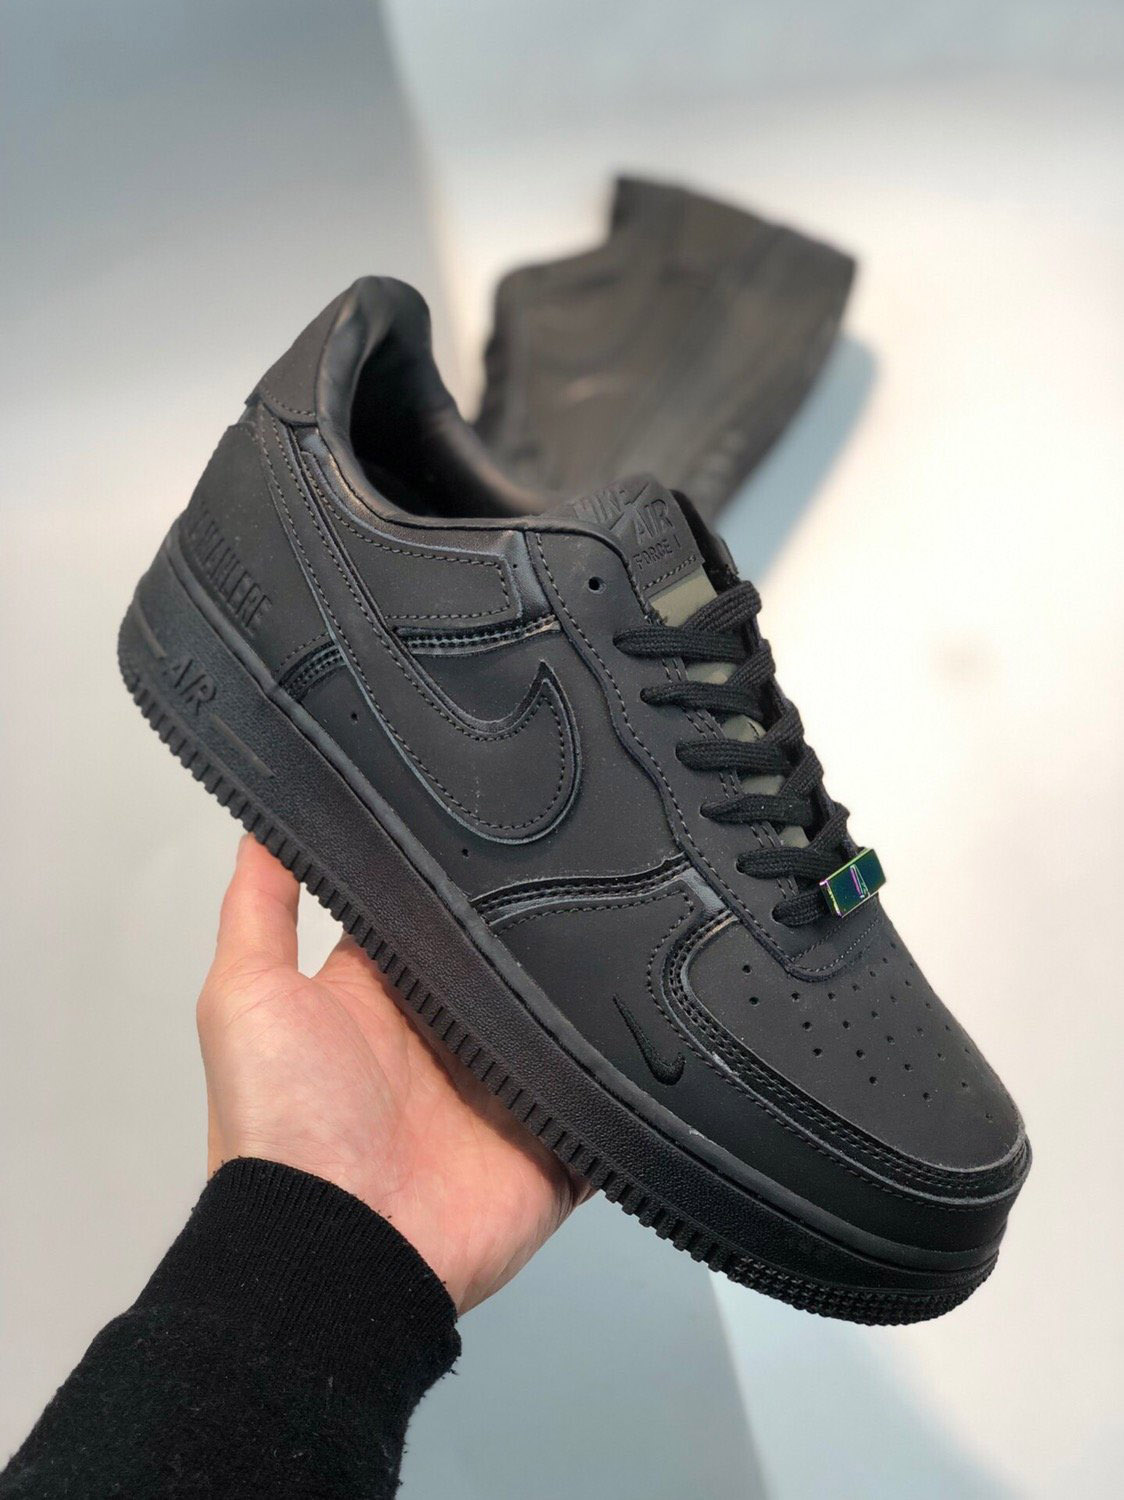 A Ma Maniére x Nike Air Force 1 Low Black/Dark Grey-Wolf Grey For 